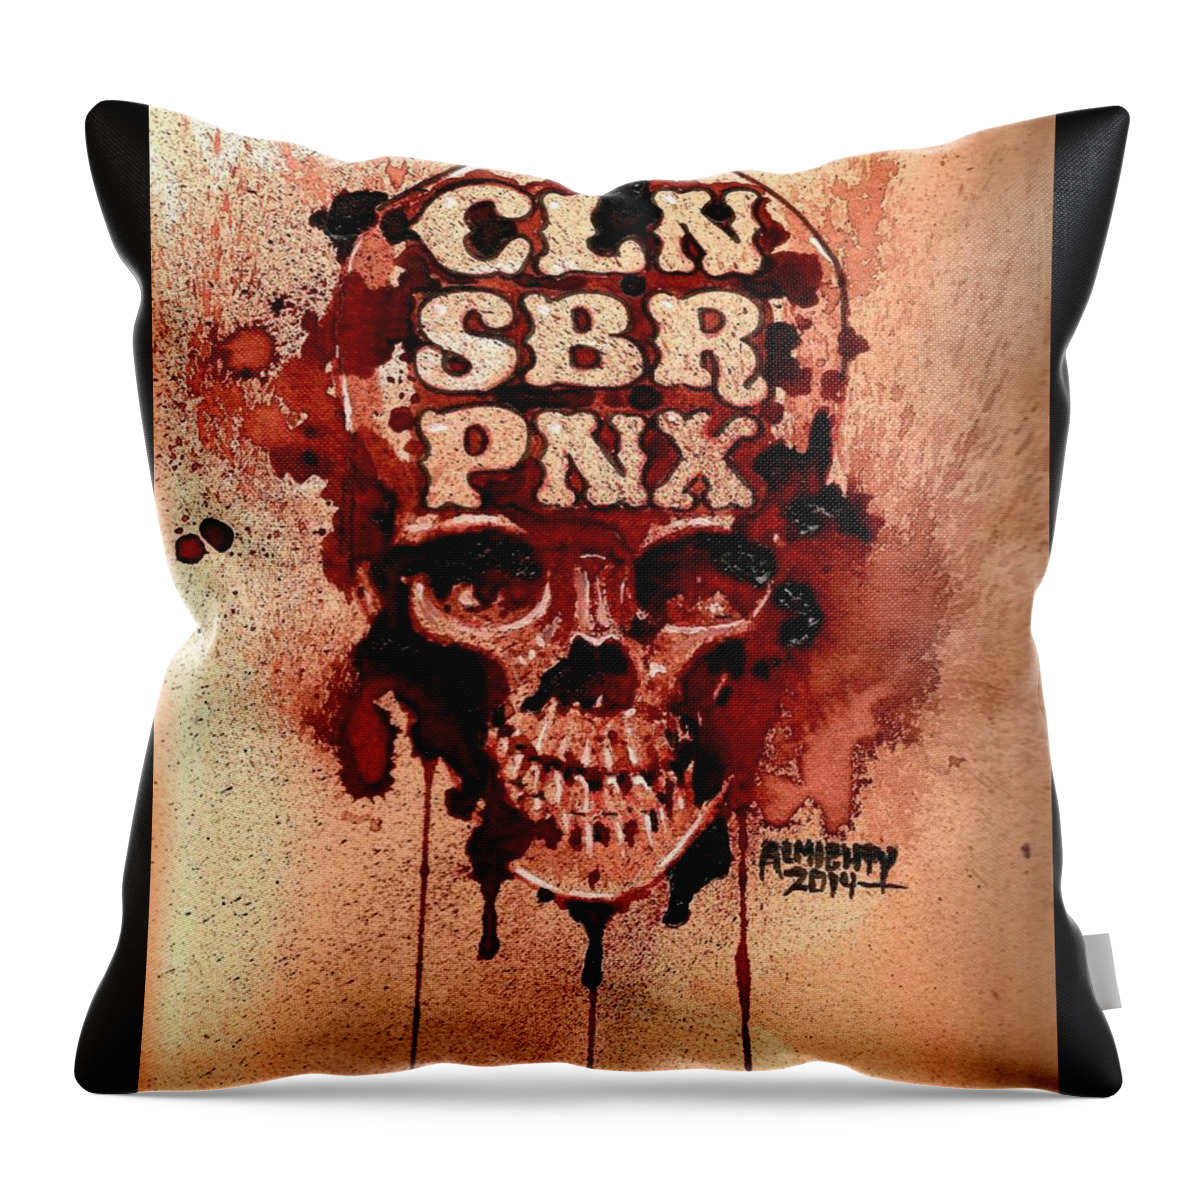 Punk Throw Pillow featuring the painting Cln Sbr Pnx by Ryan Almighty